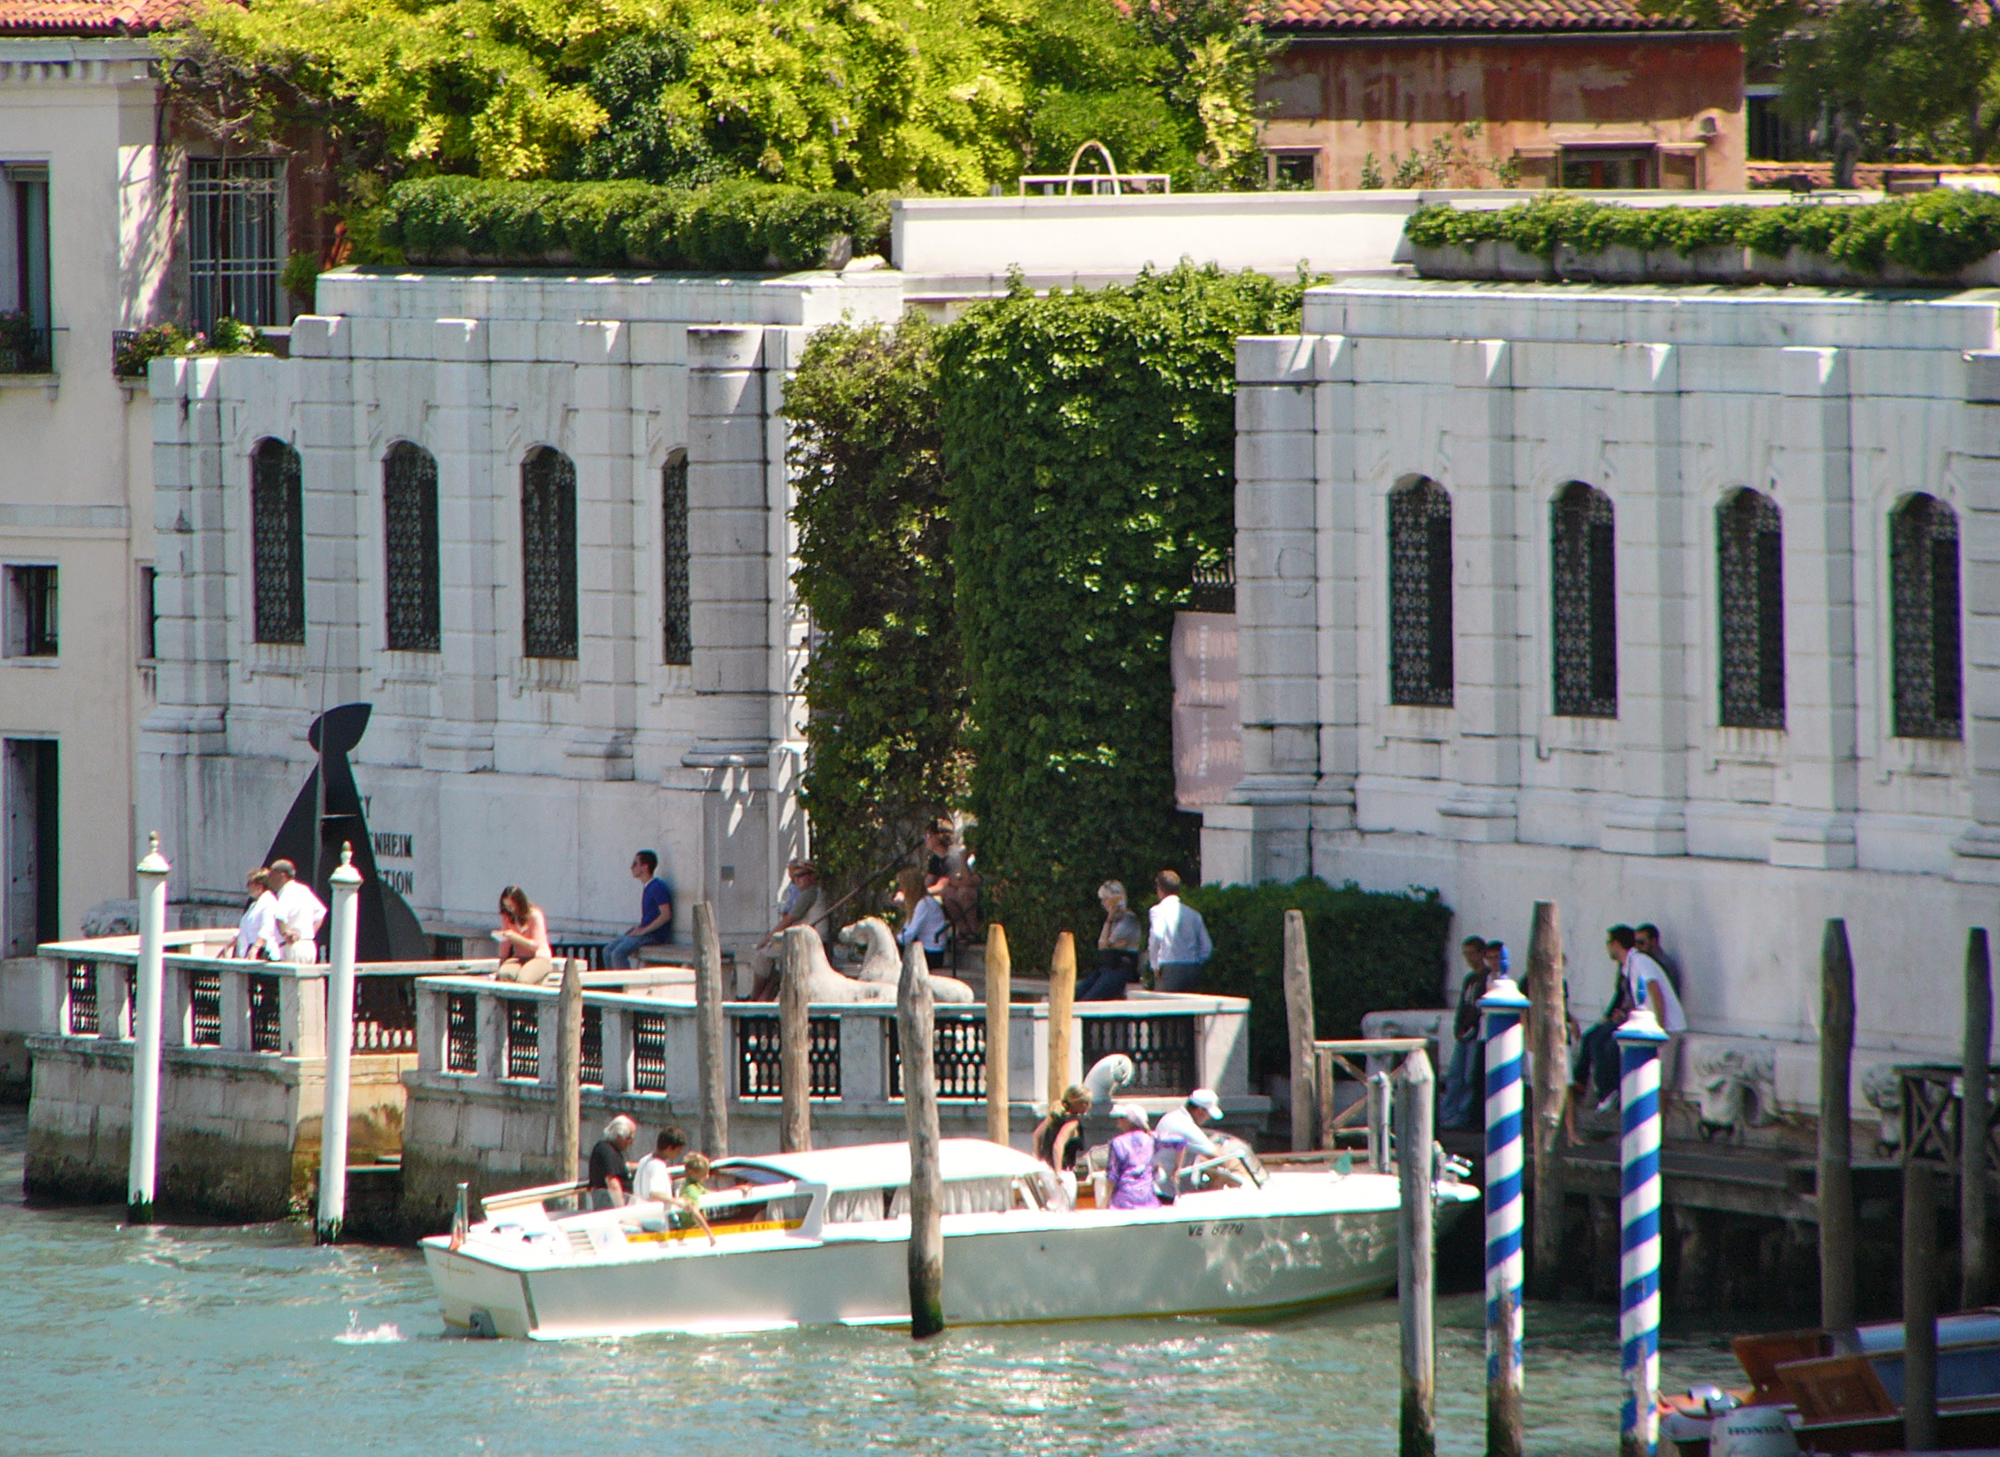 The Peggy Guggenheim museum, as seen from the Grand Canal. G. Lanting image. This file is licensed under the Creative Commons Attribution 3.0 Unported license.